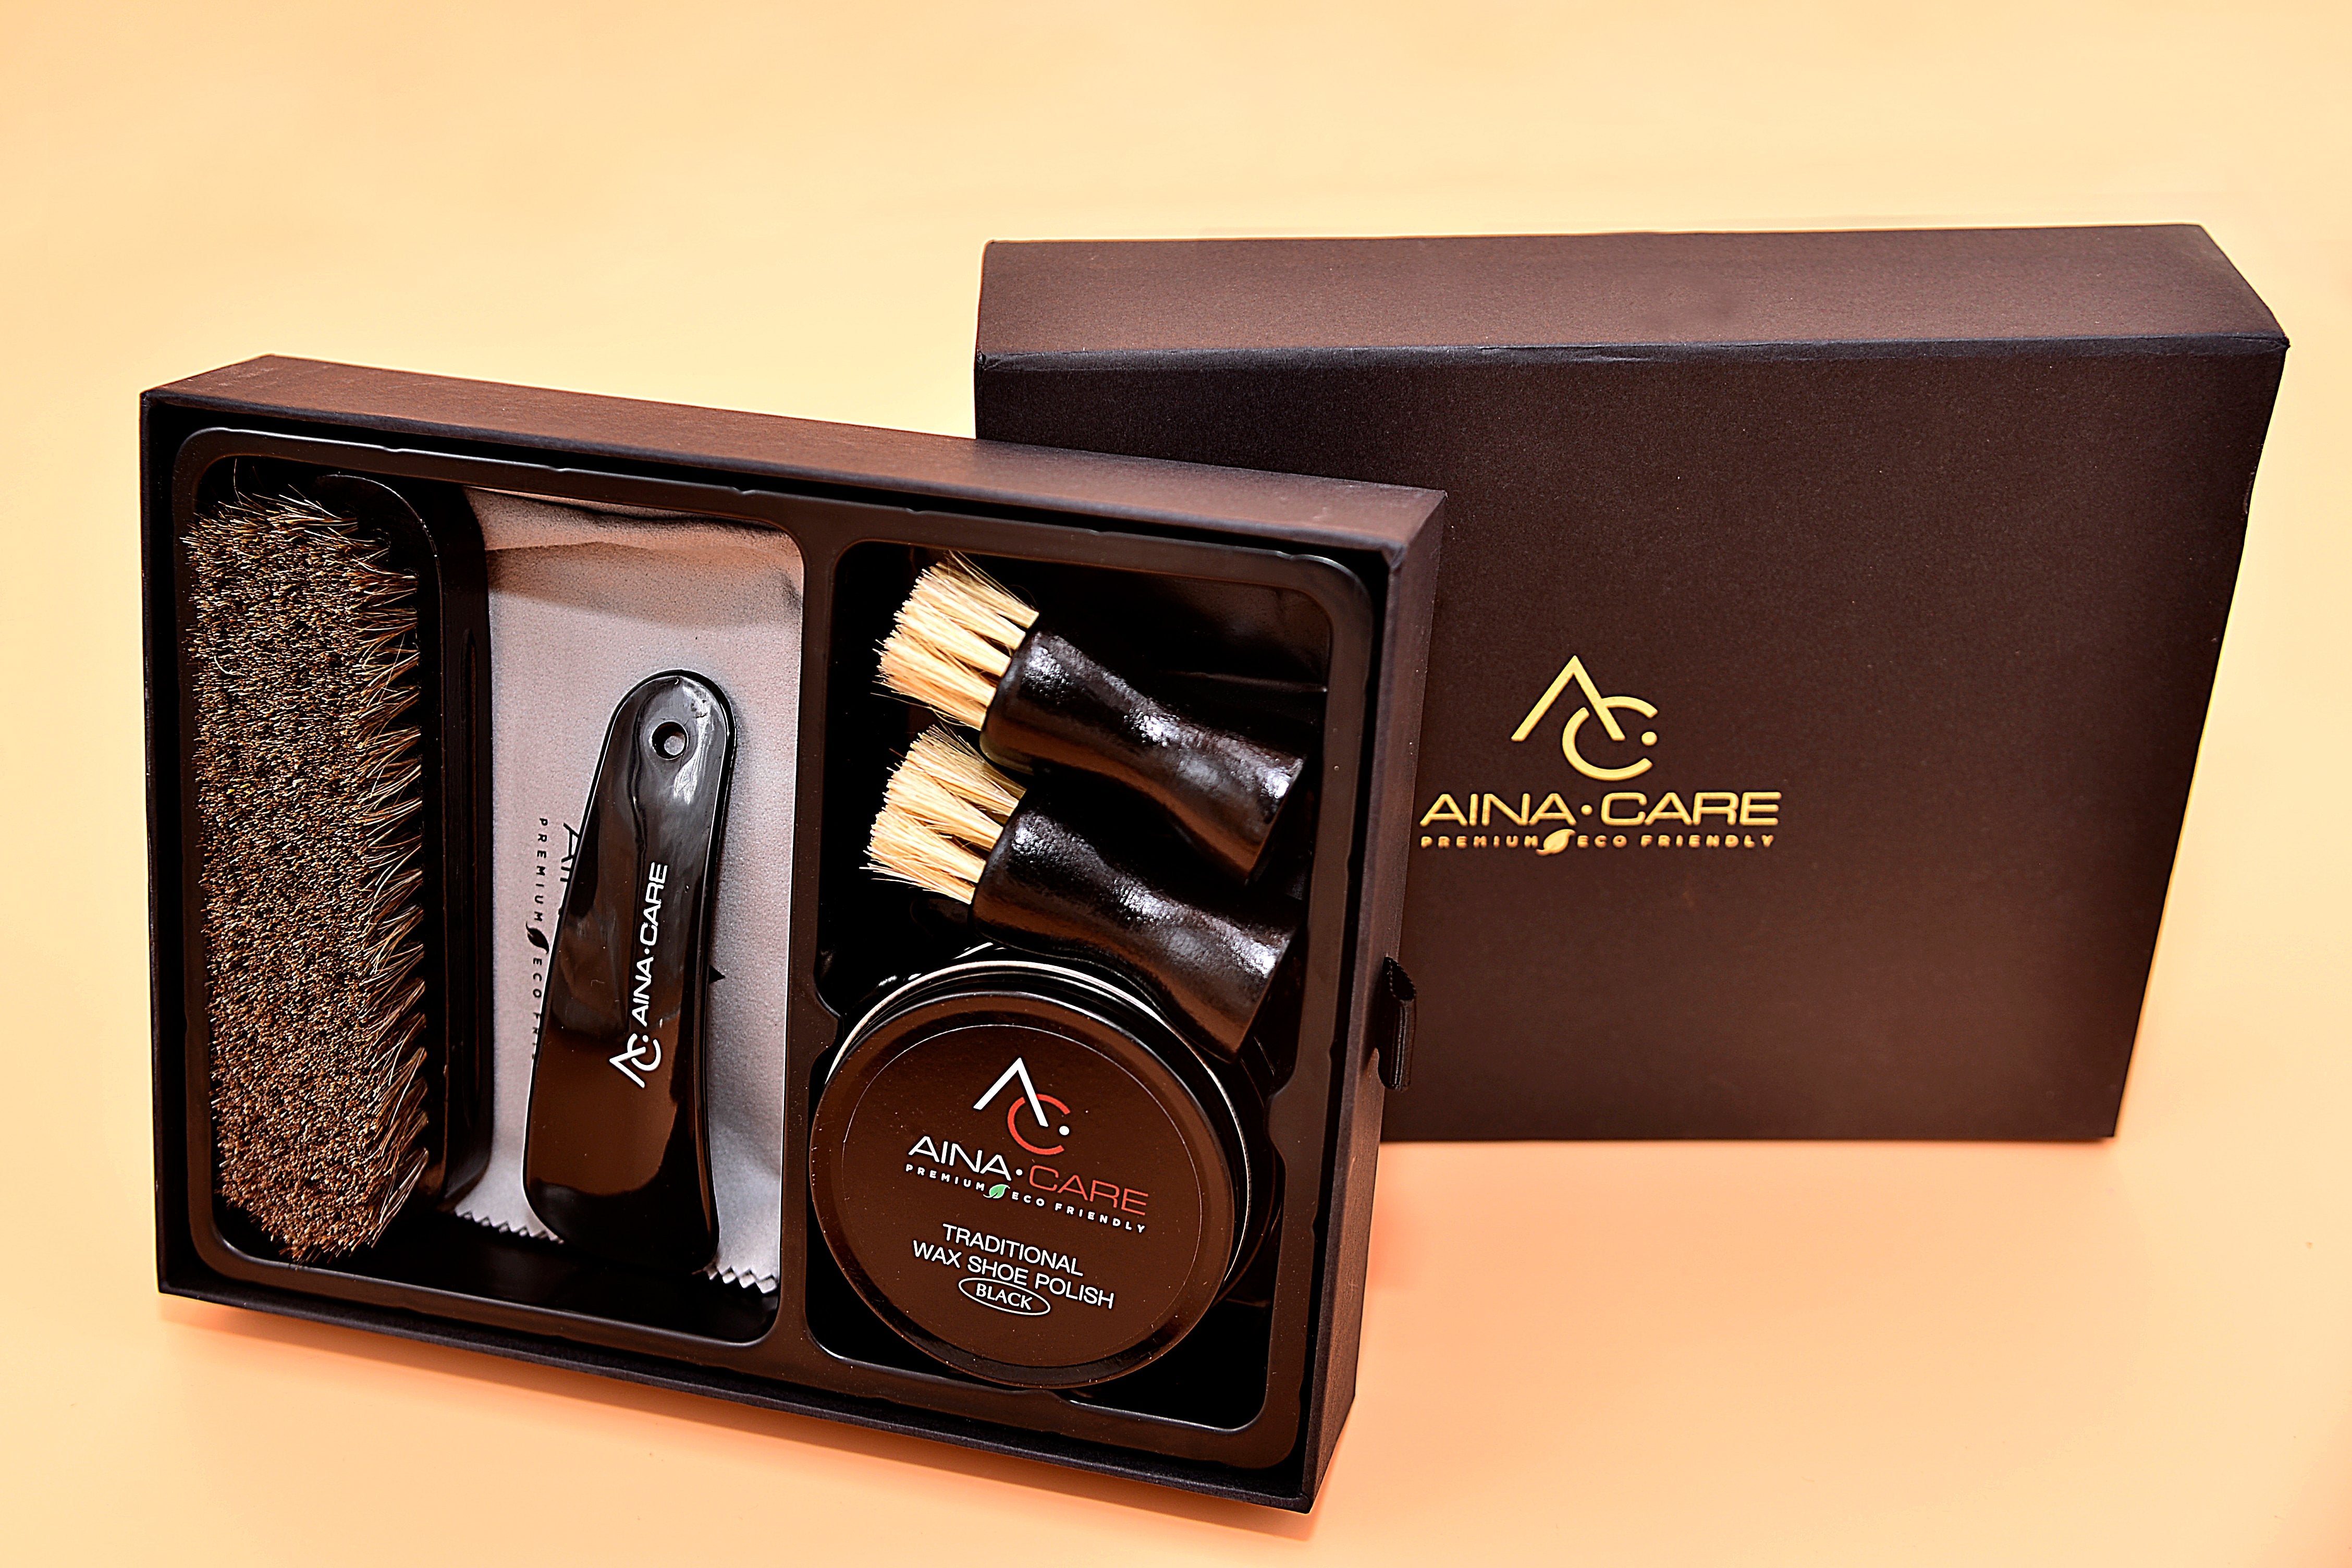 Opened box showing all items included in the Premium II Shoe Polish Kit from AinaCare. Items include a hard brush, two soft brushes, a microfiber cloth, a tub of wax polish.